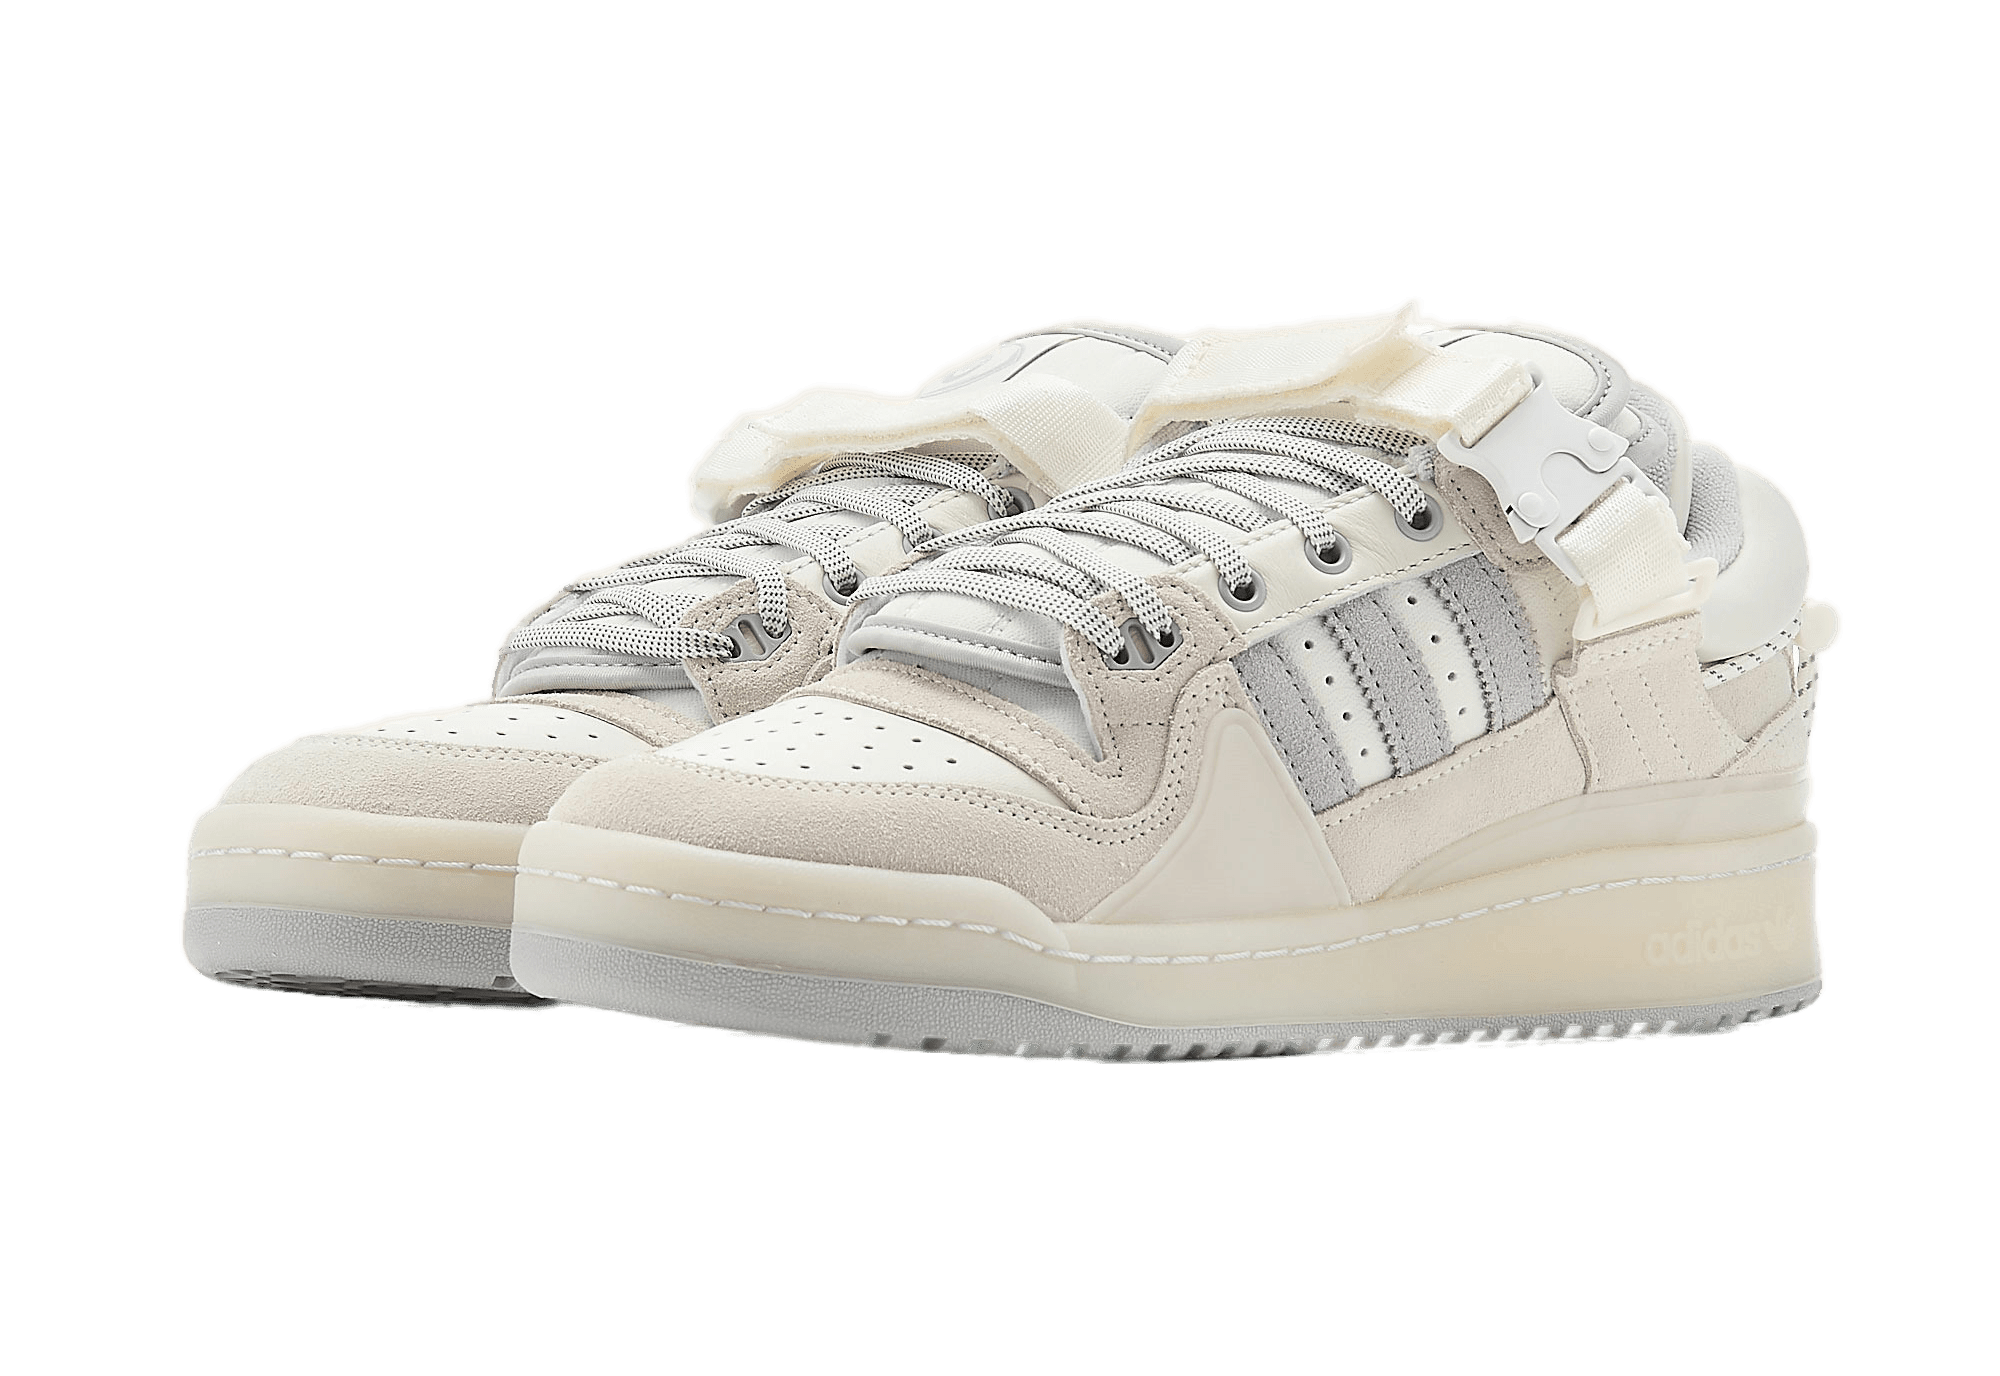 Adidas Forum Low x White SneakCenter Bunny Cloud – Bad